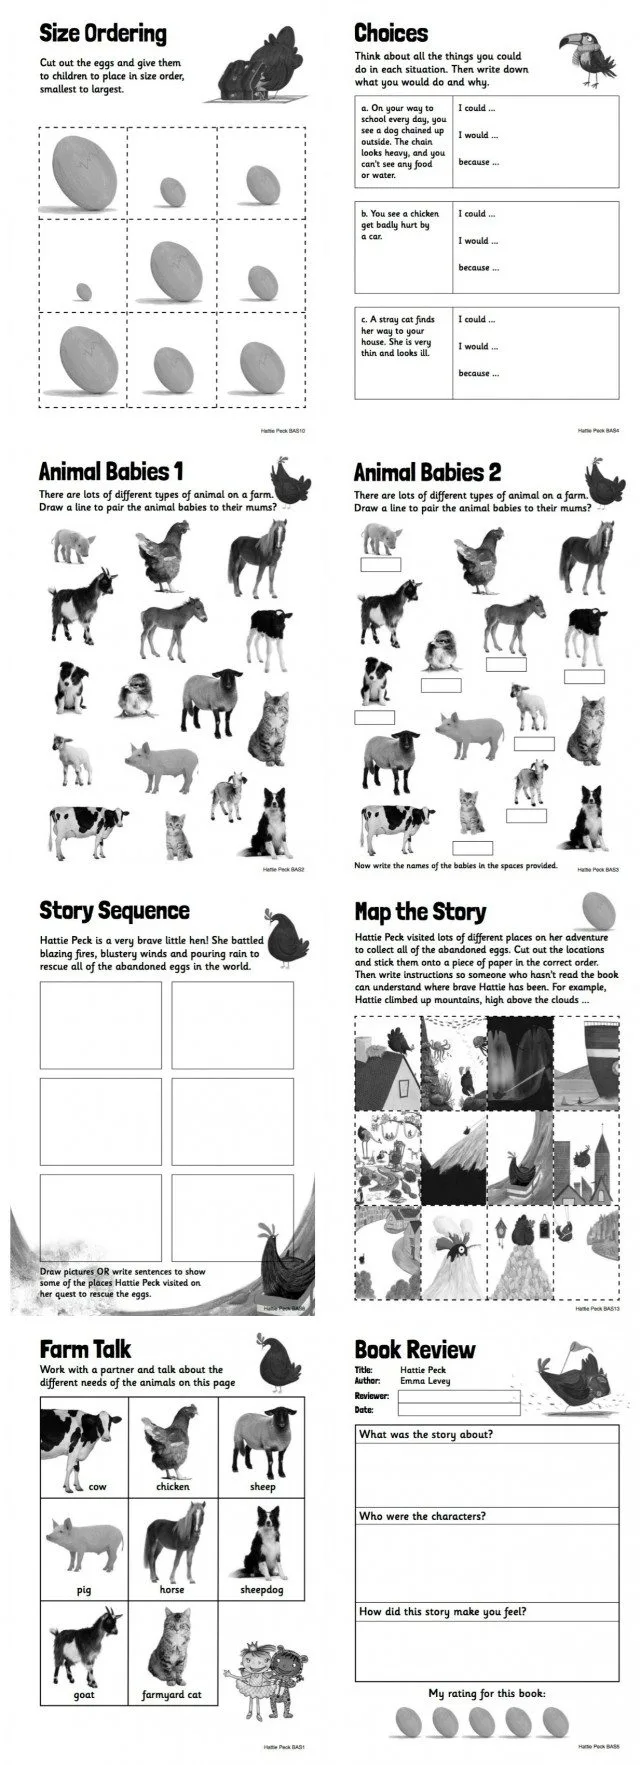 We have 17 free sheets in our learning pack to help motivate young readers from pre-school to kindergarten to primary school. 14 activity sheets, and 4 lesson plans, the ideas and activities touch on all areas of the curriculum to help both parents and teachers alike. Visit The Story Station for more great books and ideas to help kids have fun while learning.